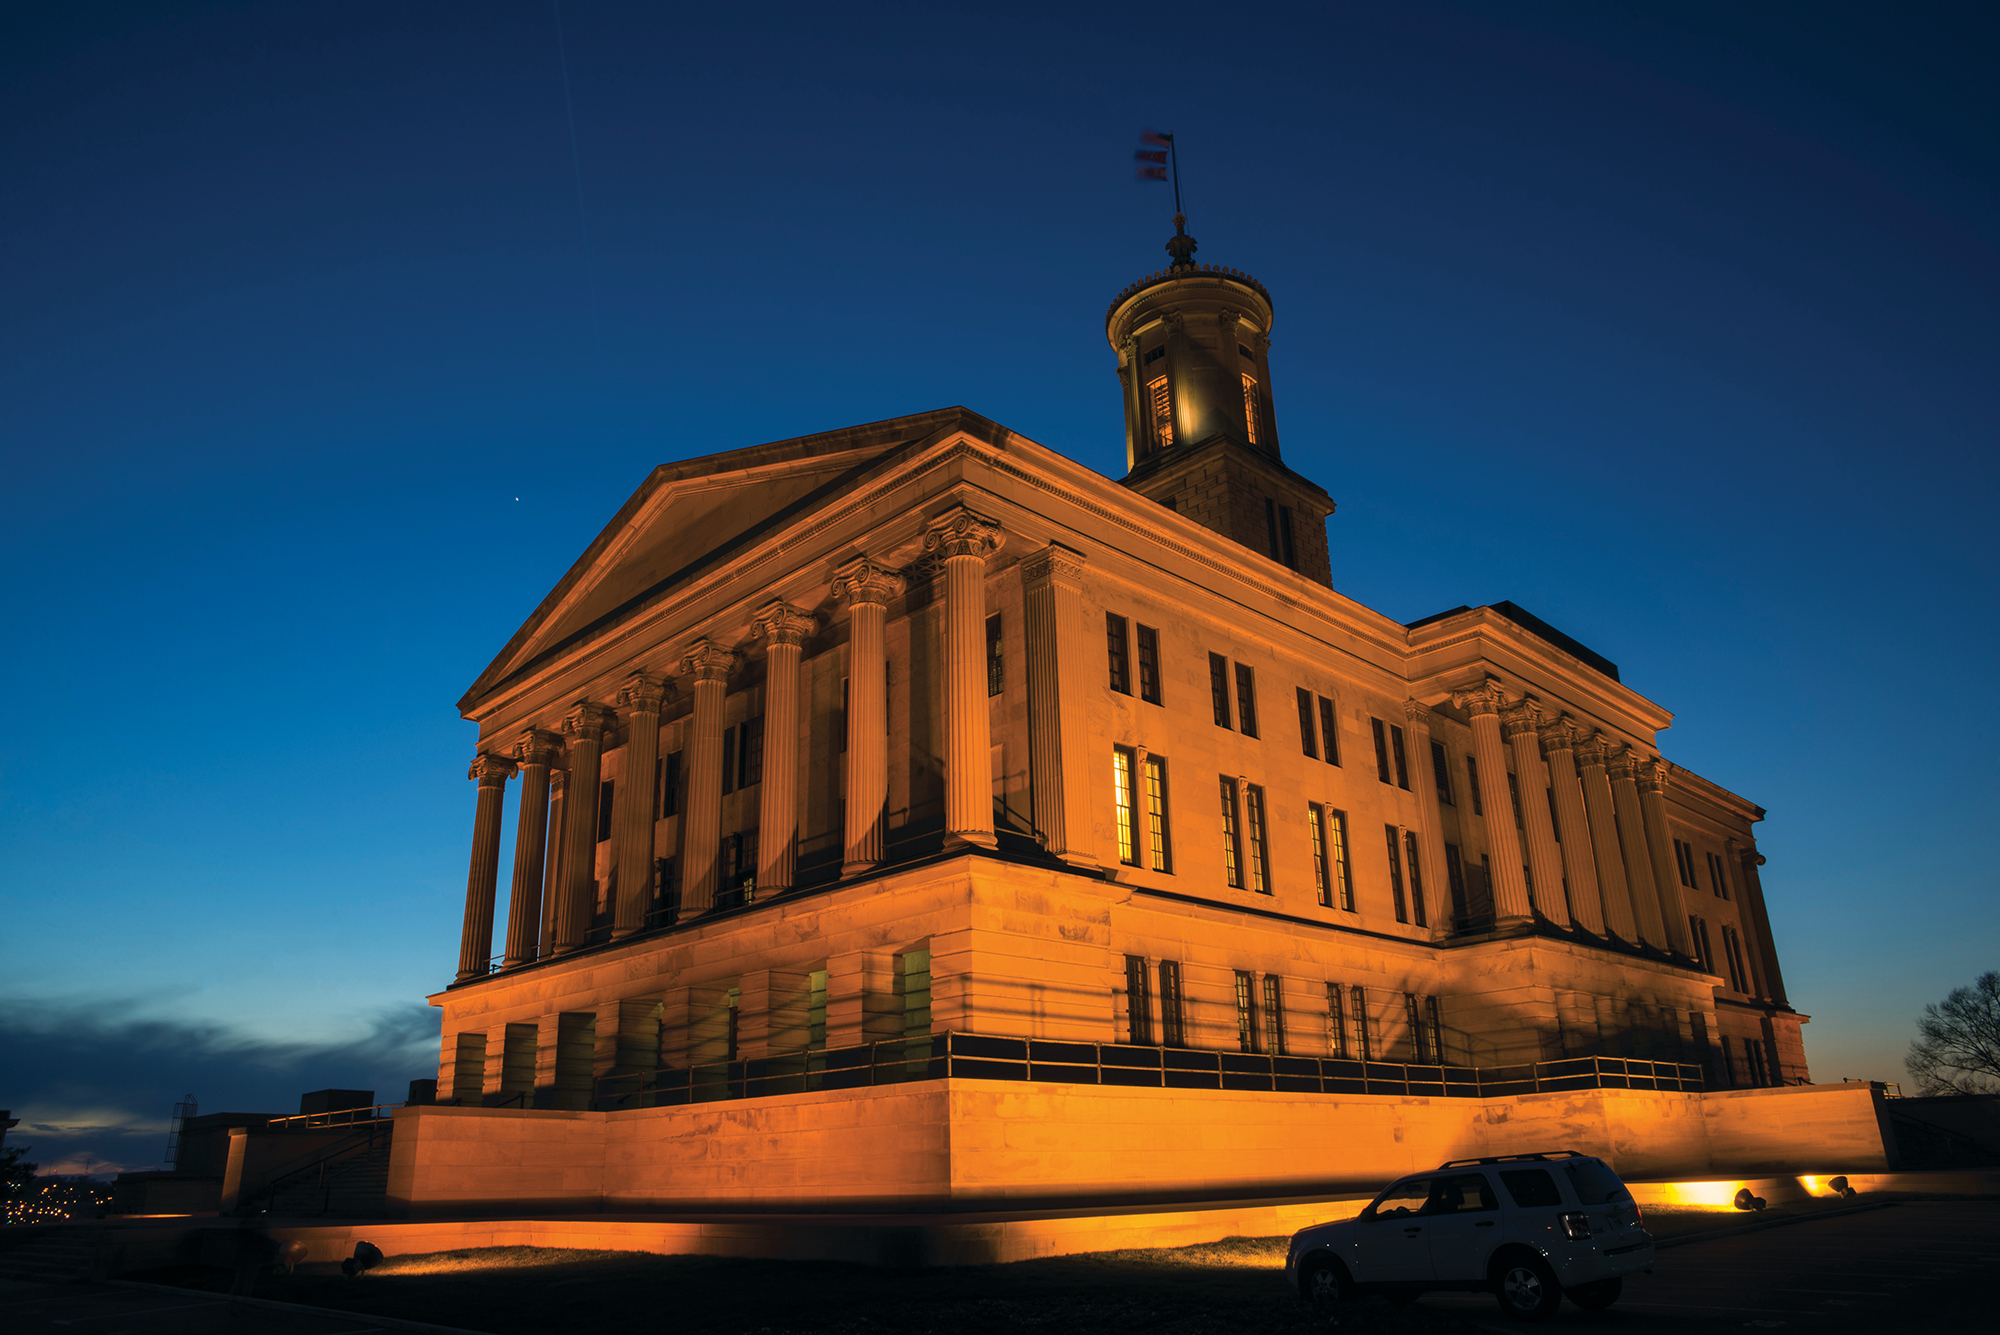 The Tennessee state Capitol building, lit at night